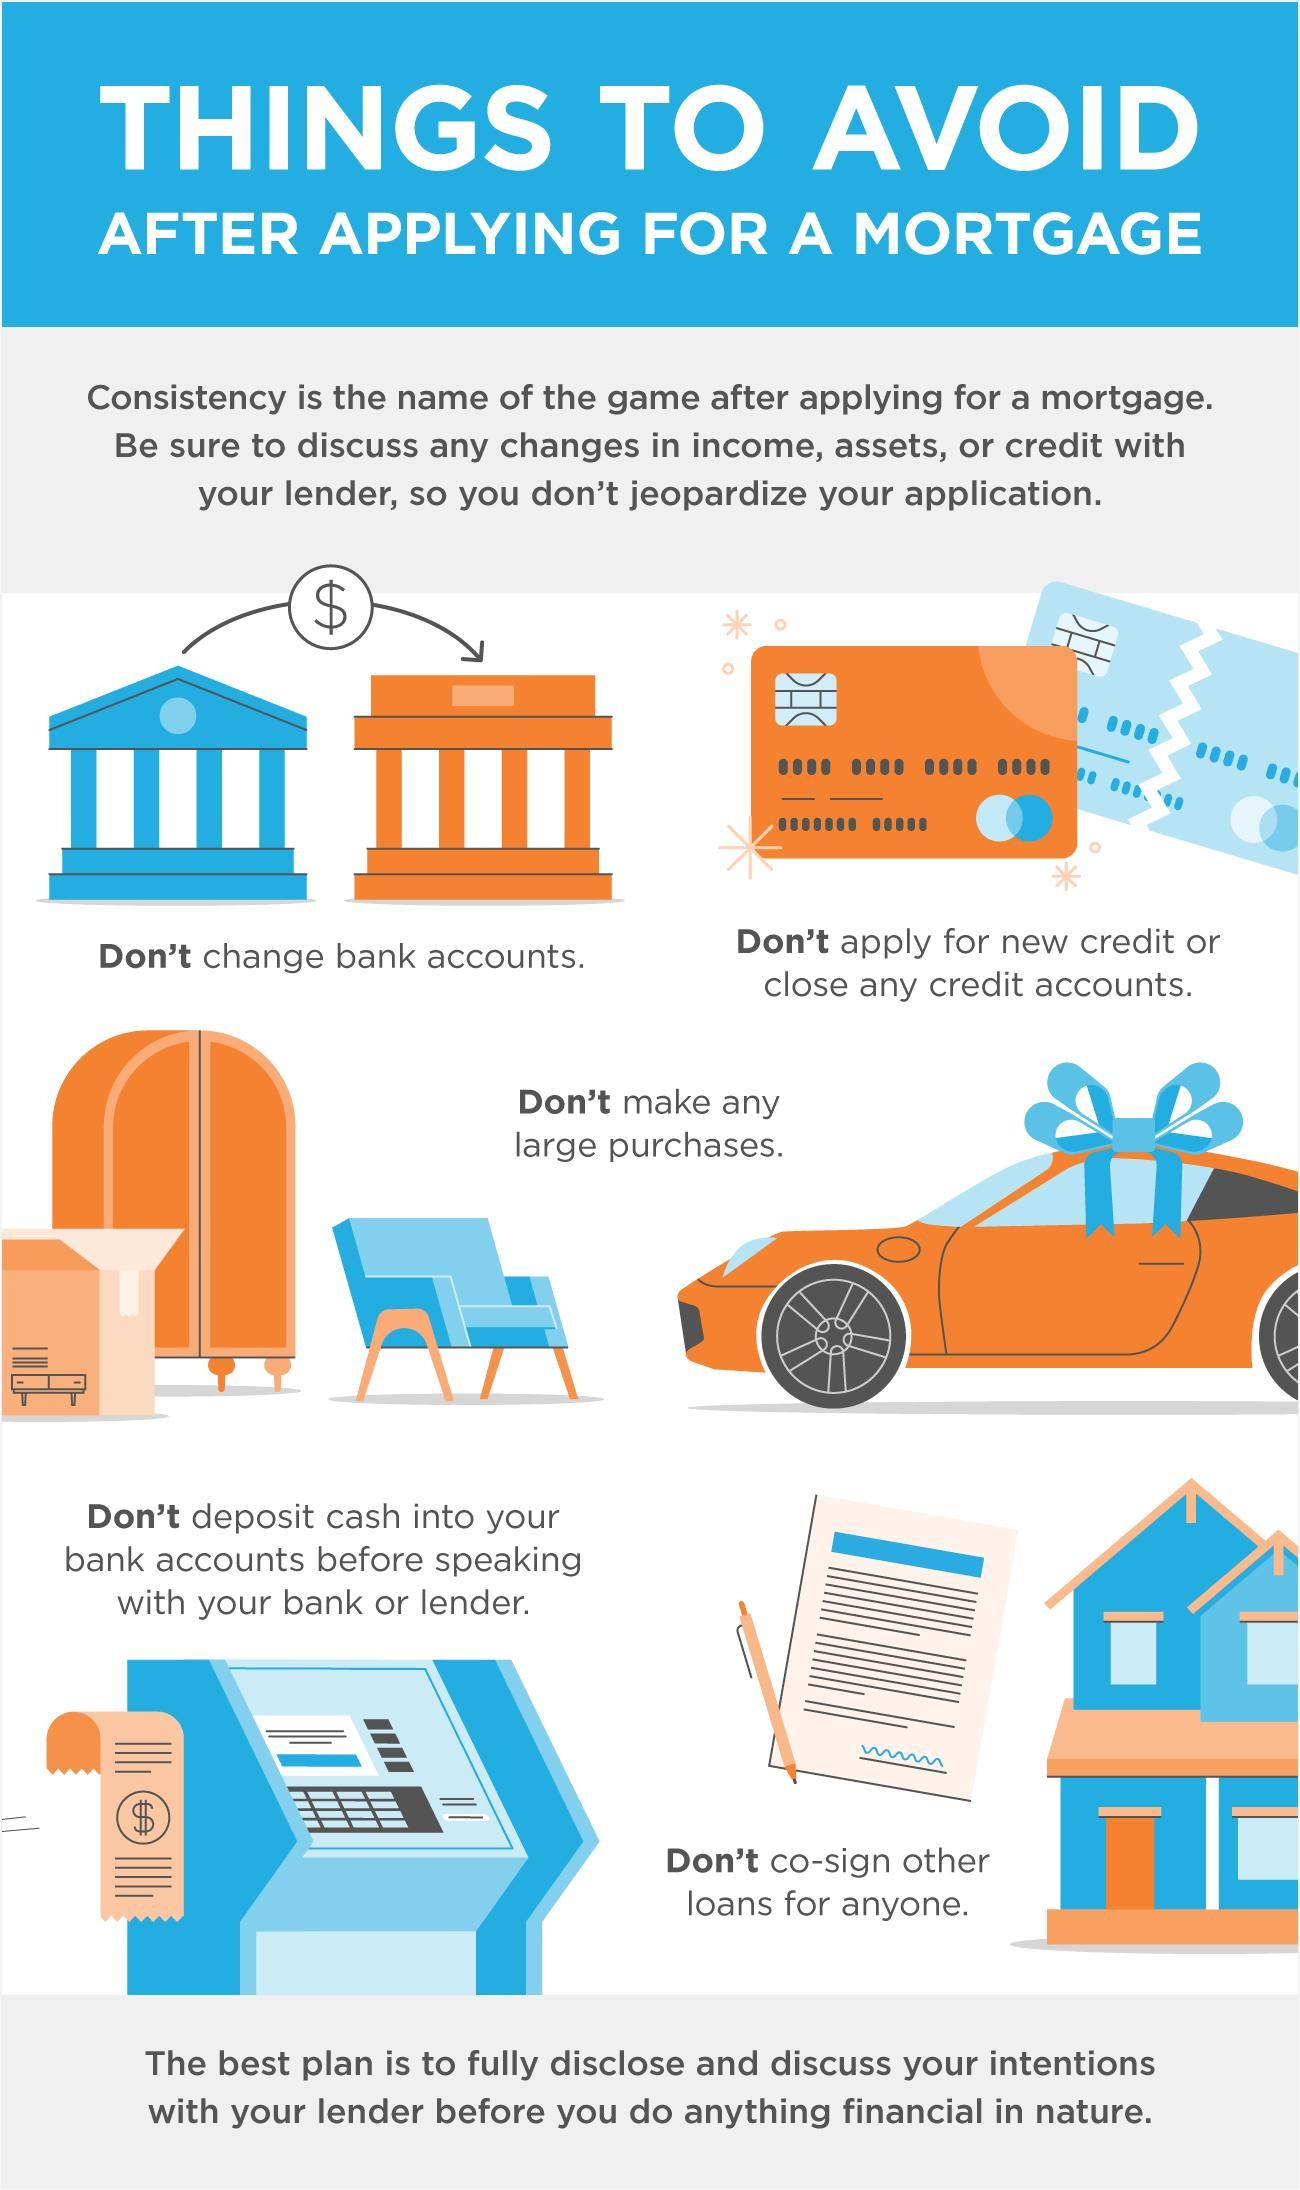 Things to Avoid after Applying for a Mortgage [INFOGRAPHIC]

Things to Avoid after Applying for a Mortgage [INFOGRAPHIC] | Simplifying The Market
Some Highlights
There are a few key things to make sure you avoid after applying for a mortgage to help make sure you still qualify for your loan at the closing table.
Along the way, be sure to discuss any changes in income, assets, or credit with your lender, so you don’t unintentionally jeopardize your application.
The best plan is to fully disclose your intentions with your lender before you do anything financial in nature.
Some Highlights
There are a few key things to make sure you avoid after applying for a mortgage to help make sure you still qualify for your loan at the closing table.
Along the way, be sure to discuss any changes in income, assets, or credit with your lender, so you don’t unintentionally jeopardize your application.
The best plan is to fully disclose your intentions with your lender before you do anything financial in nature.